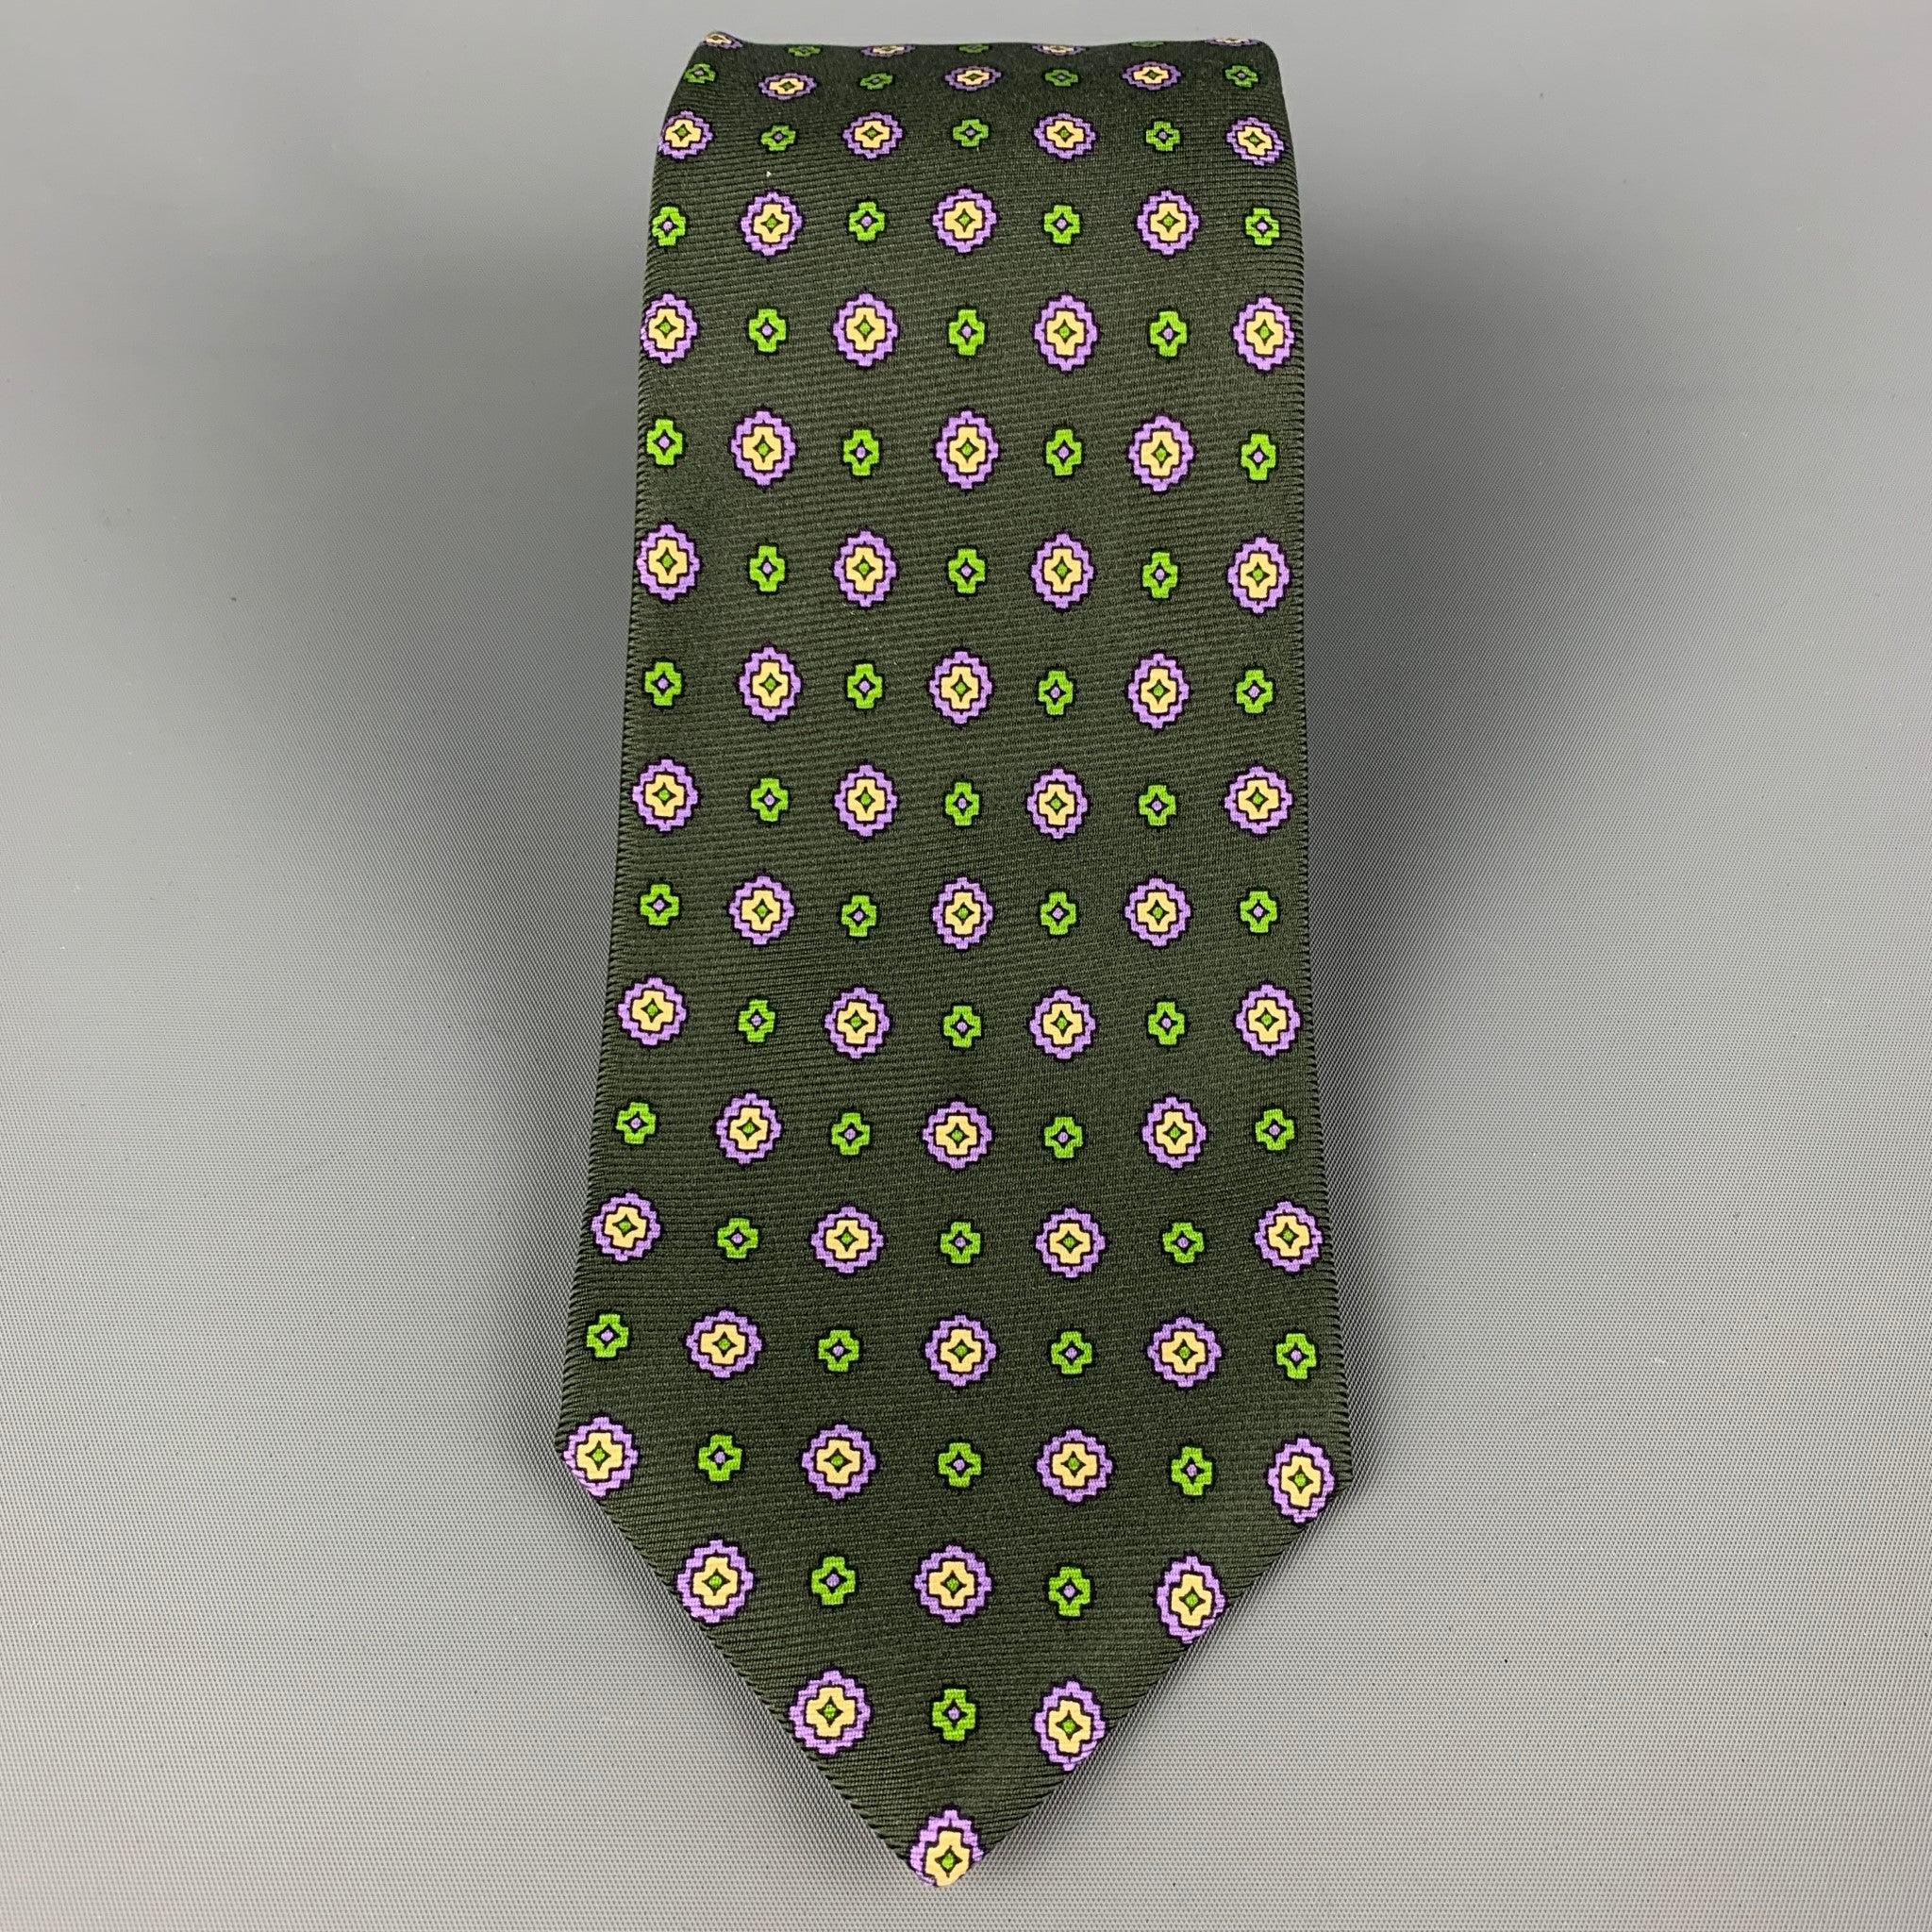 KITON necktie comes in a dark green & purple
 silk with a all over abstract floral print. Made in Italy . Very Good Pre-Owned Condition. Width: 4 inches  Length: 61 inches 

  
  
 
Reference: 120382
Category: Tie
More Details
    
Brand: 